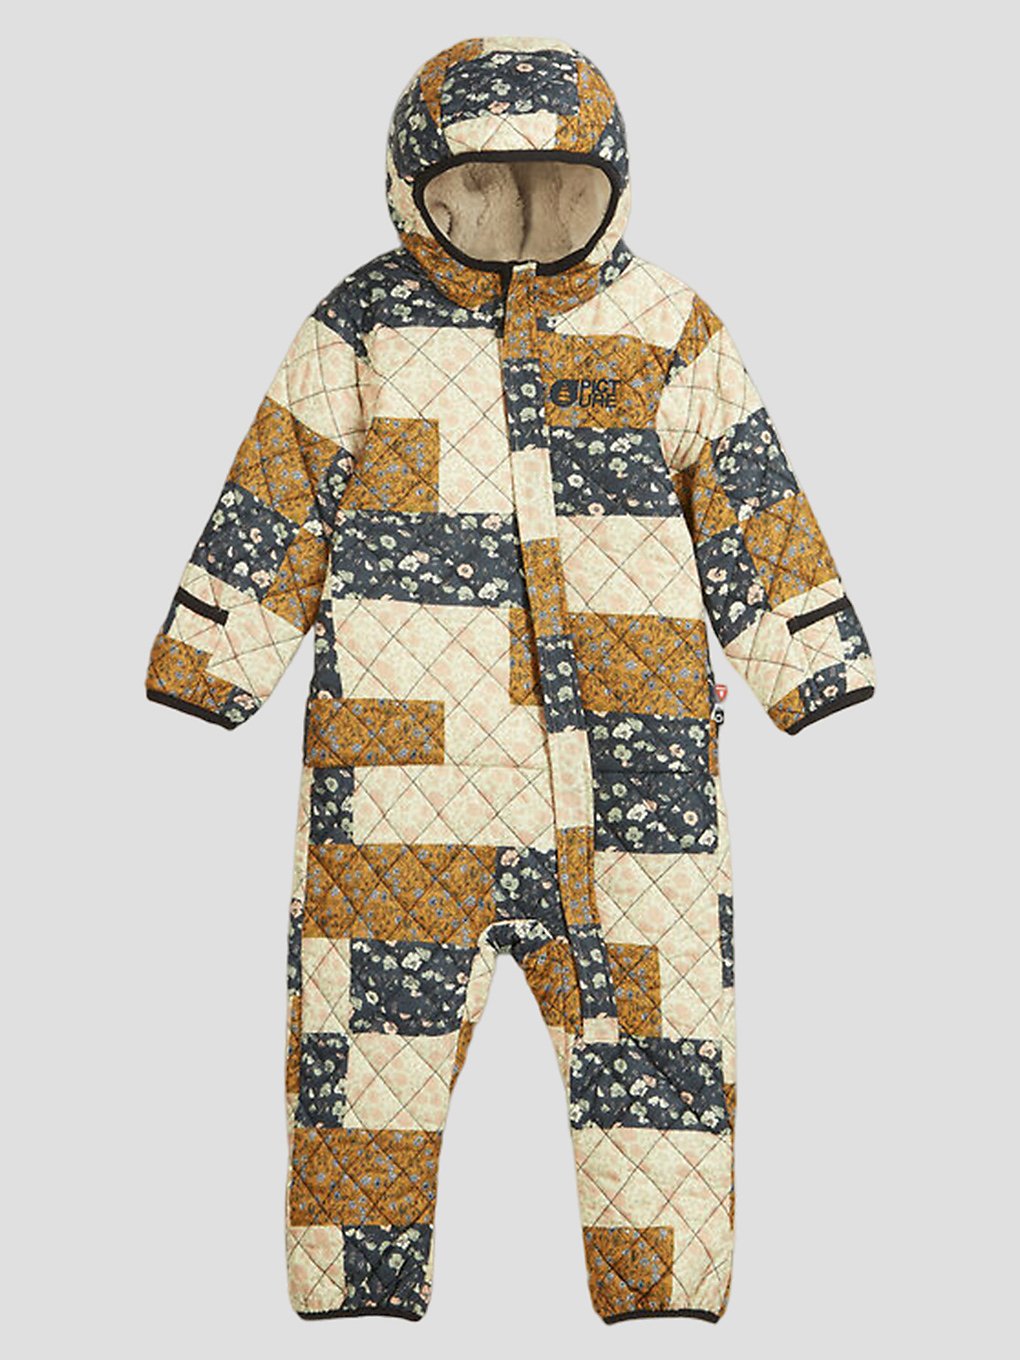 Picture Snowy Overall b patchwork kaufen